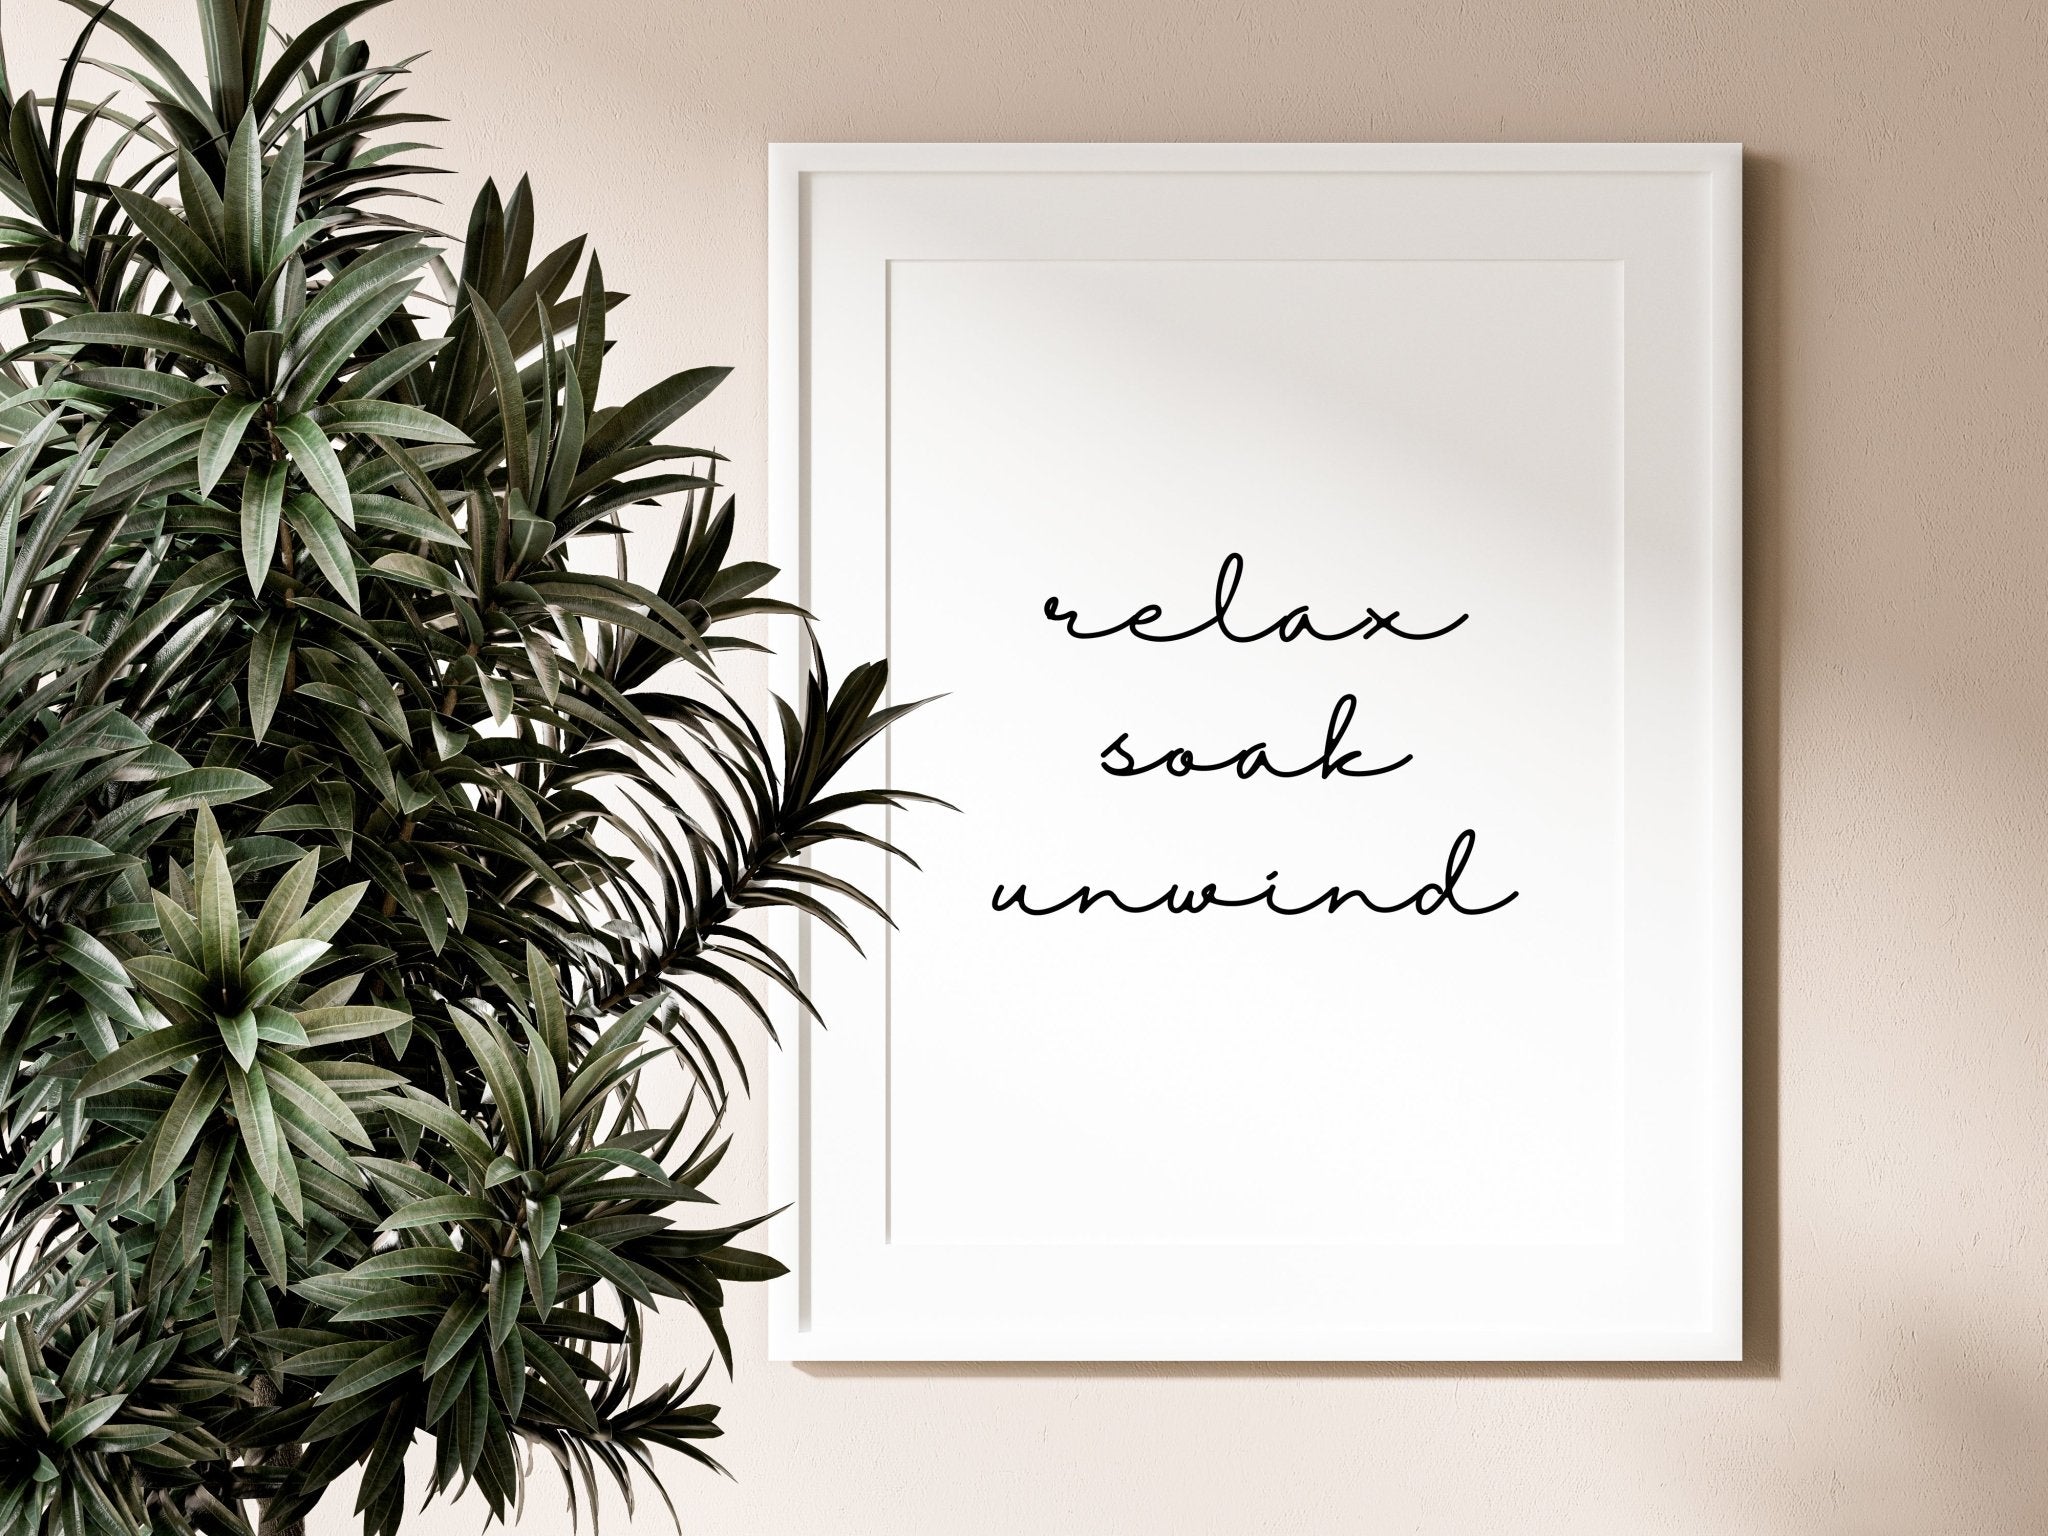 Relax, Soak and Unwind Calligraphy Quirky Bathroom Décor